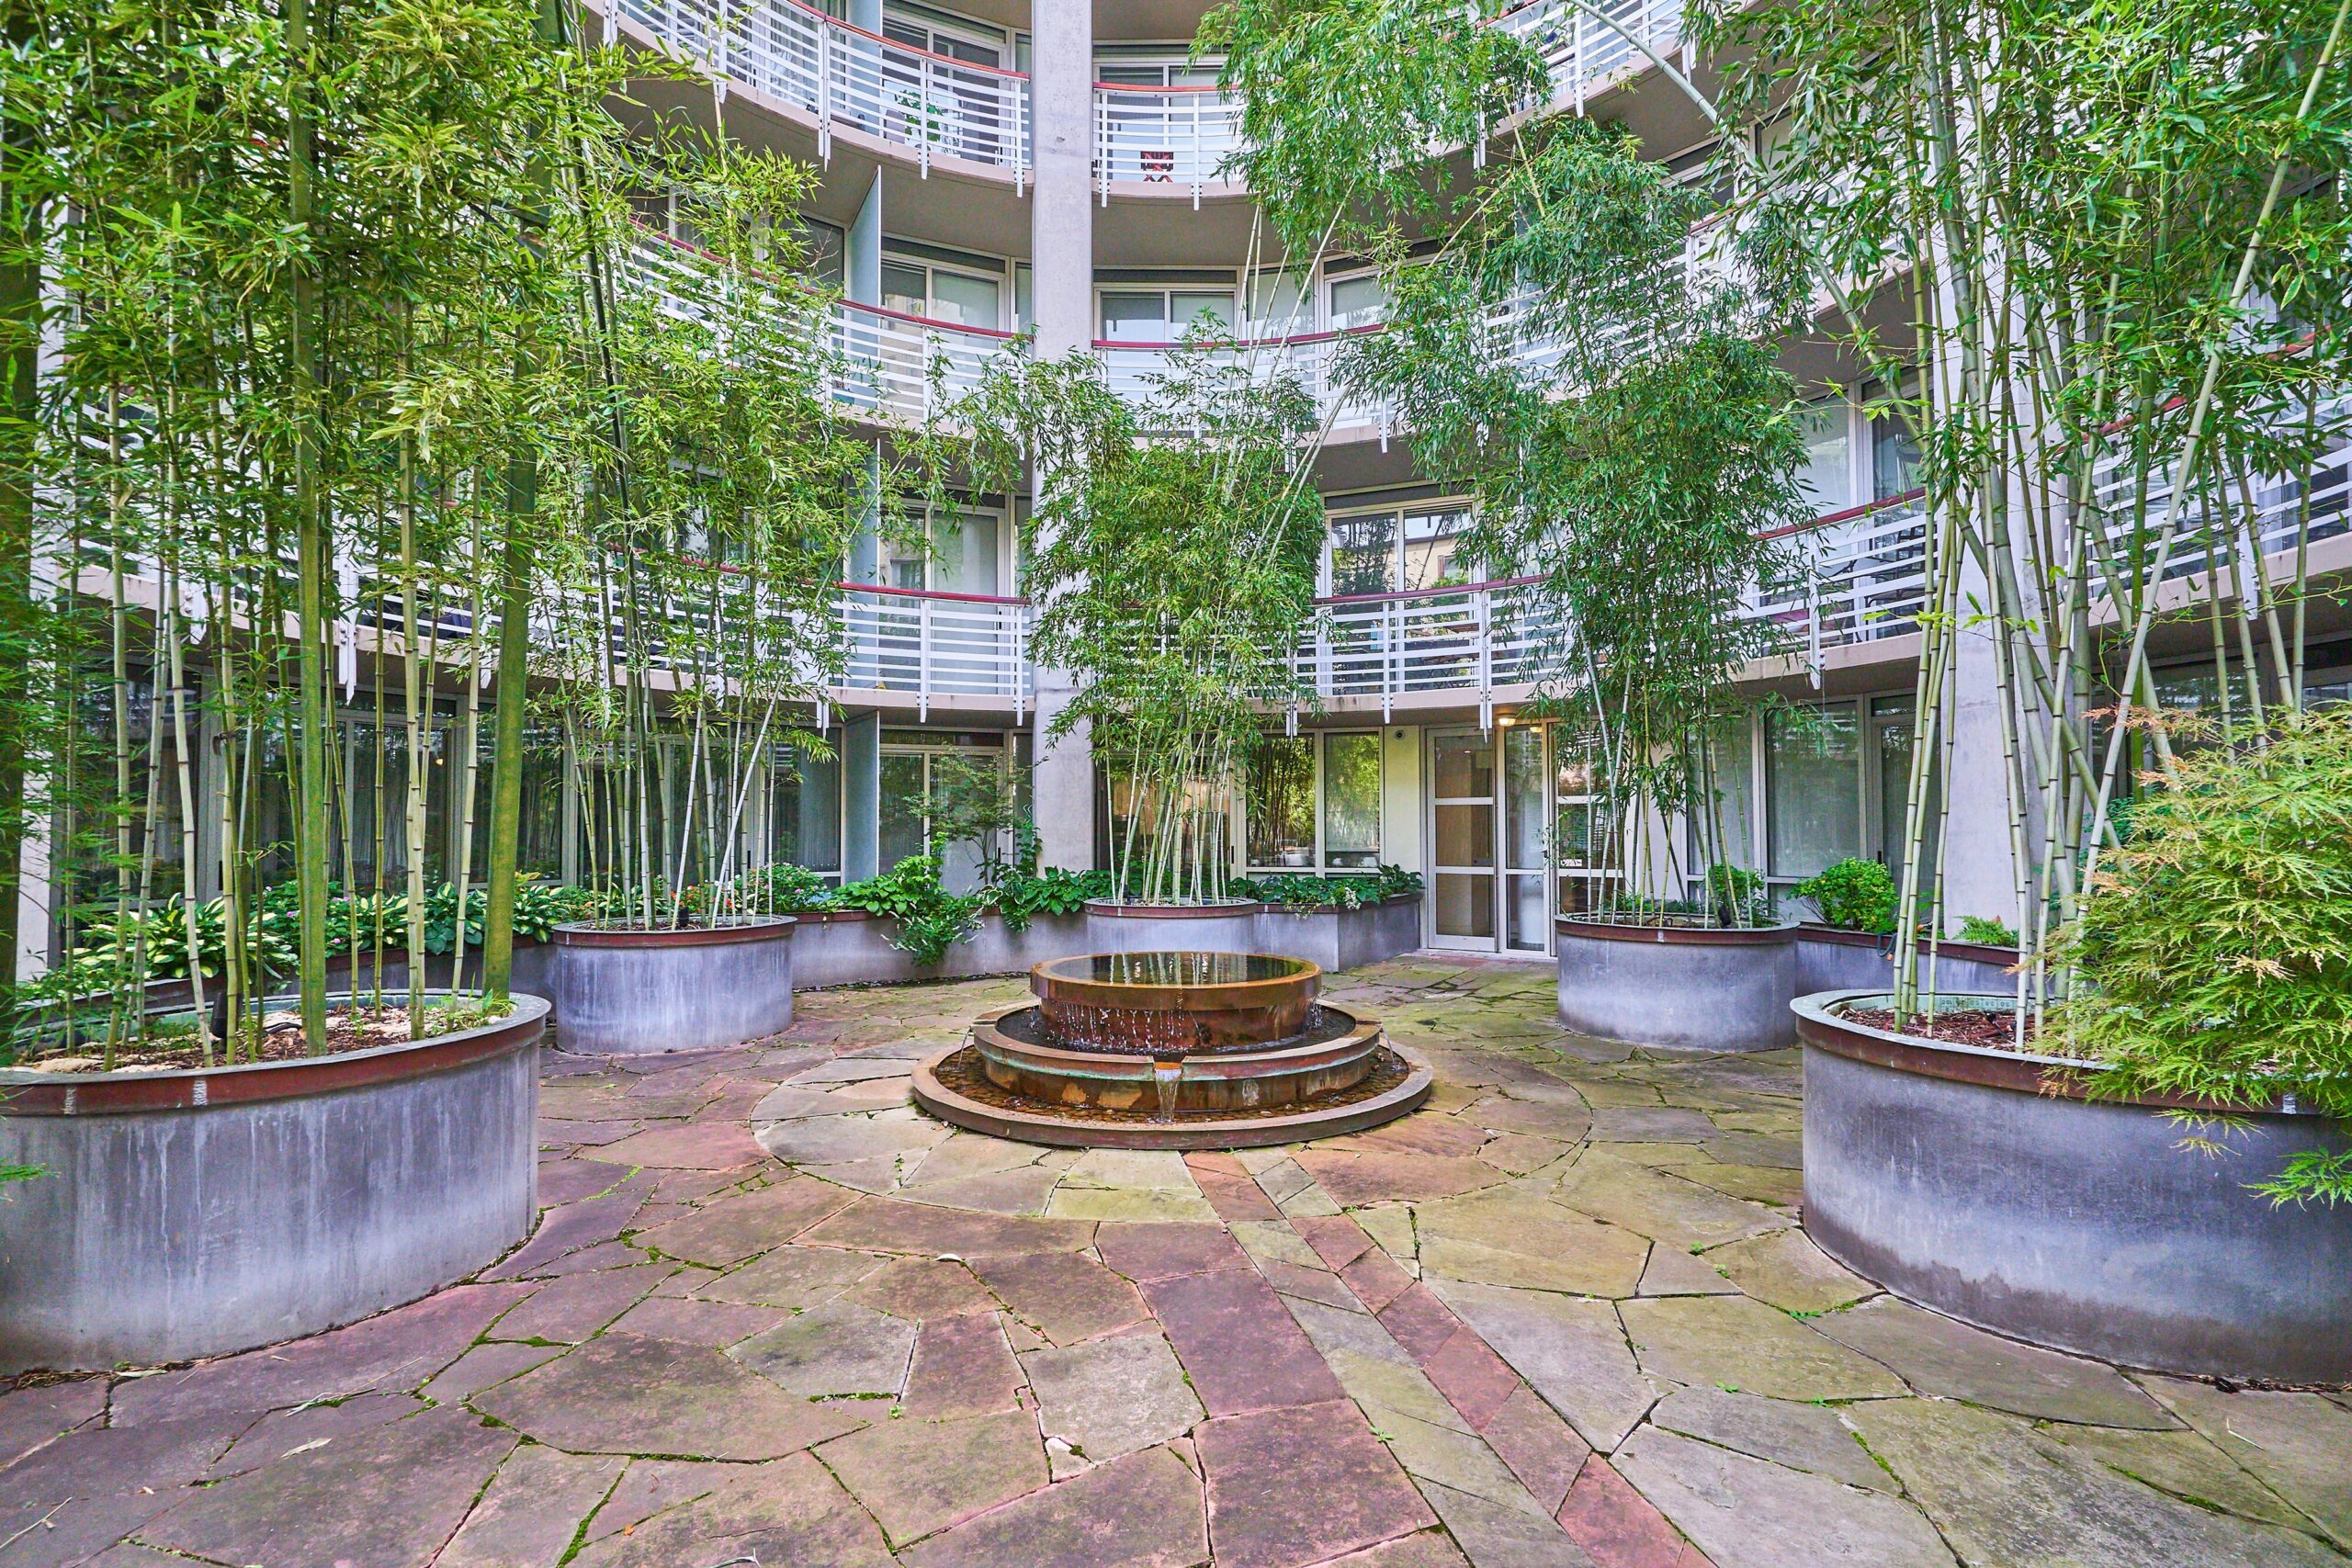 Professional exterior photo of 1300 13th St NW #102, Washington DC - showing the building's private courtyard and fountain